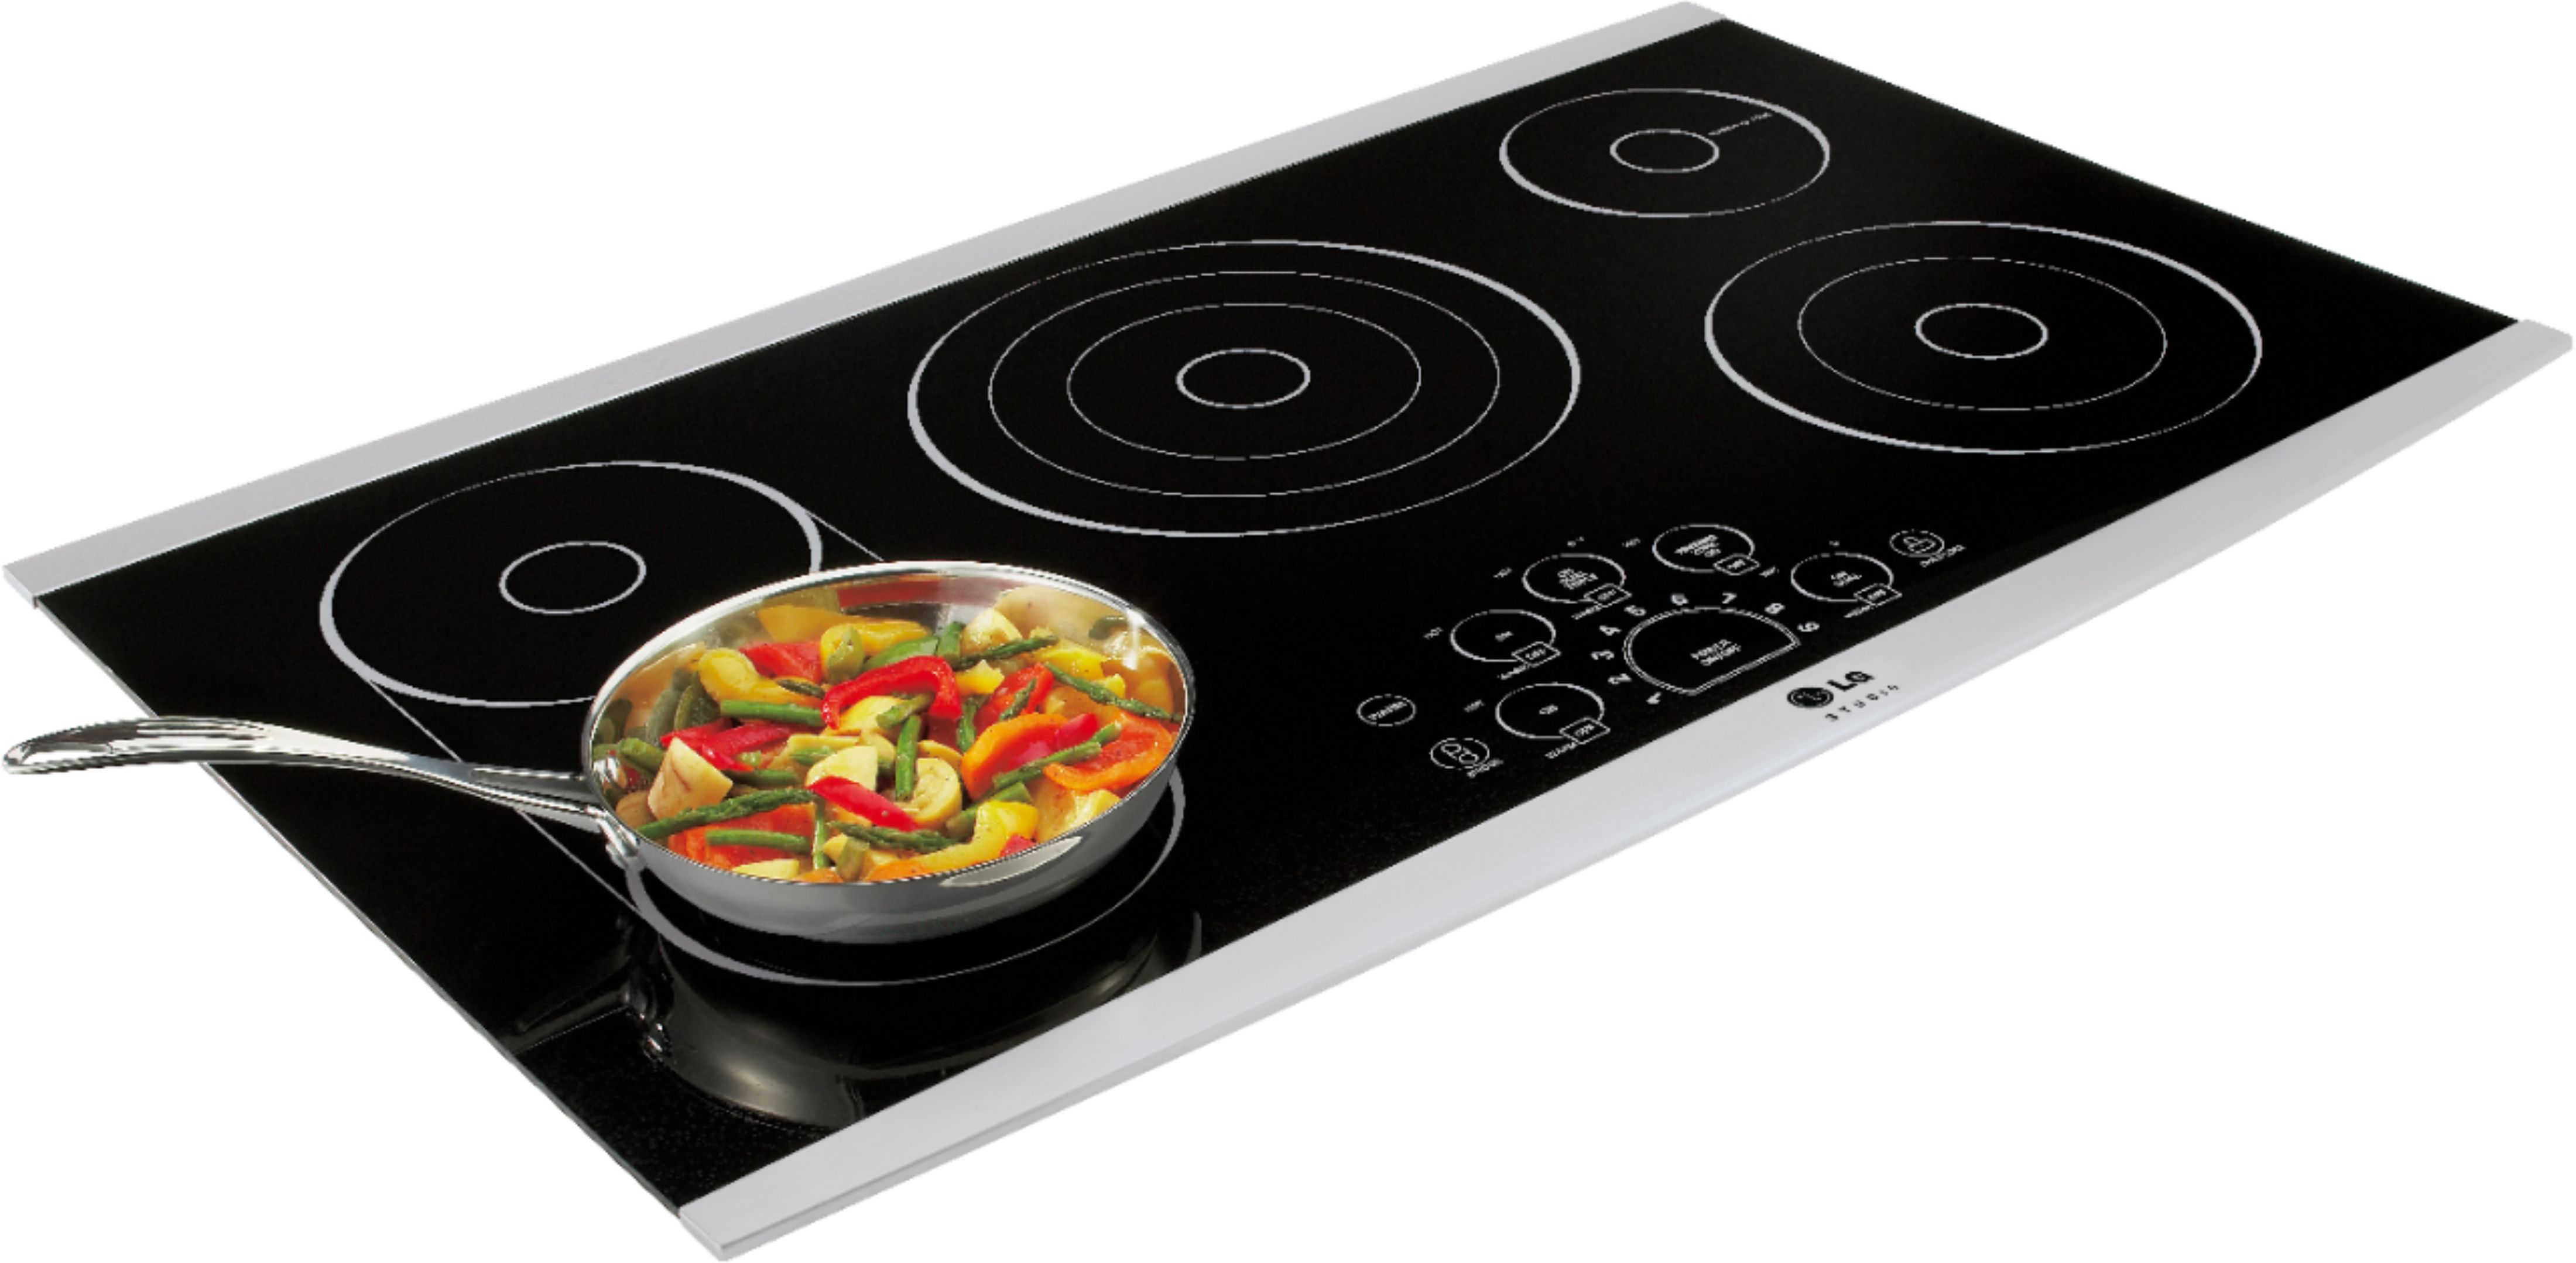 Angle View: LG - STUDIO 30" Built-In Electric Cooktop with 5 Elements, Hot Surface Indicator and Bridge Element - Stainless steel